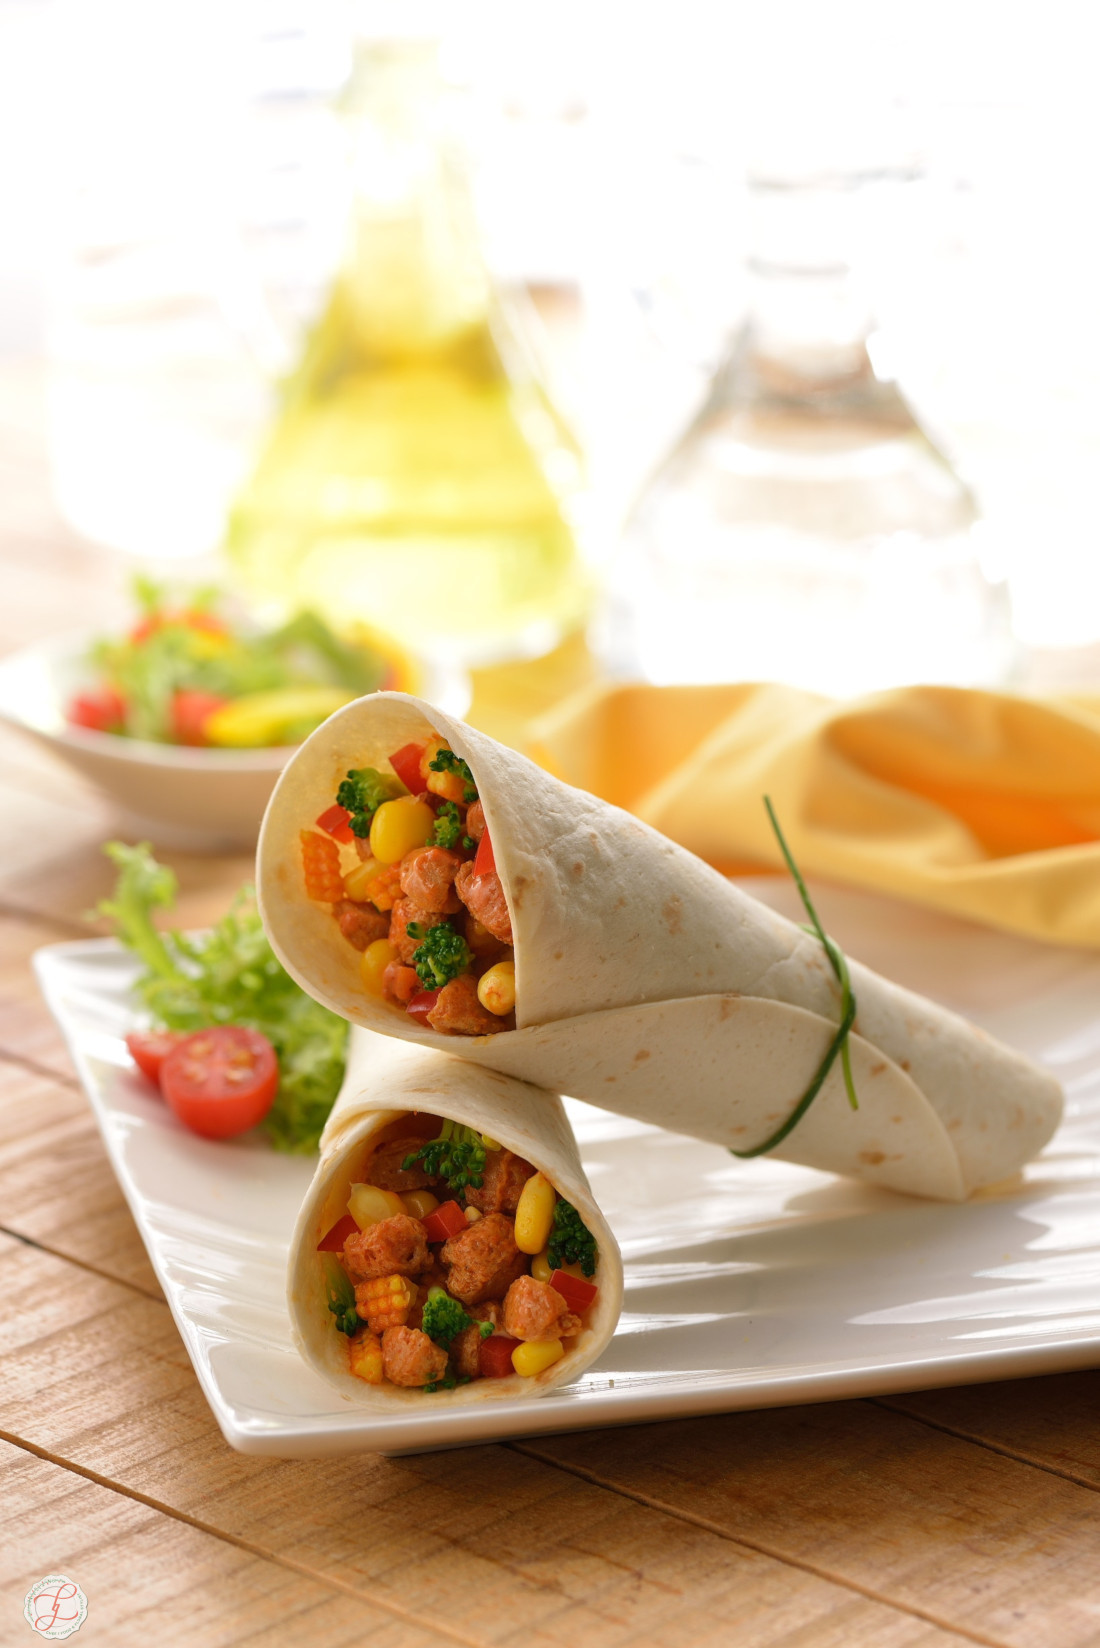 Foodstyling-Snacks wrap food, a soft flatbread rolled around a filling